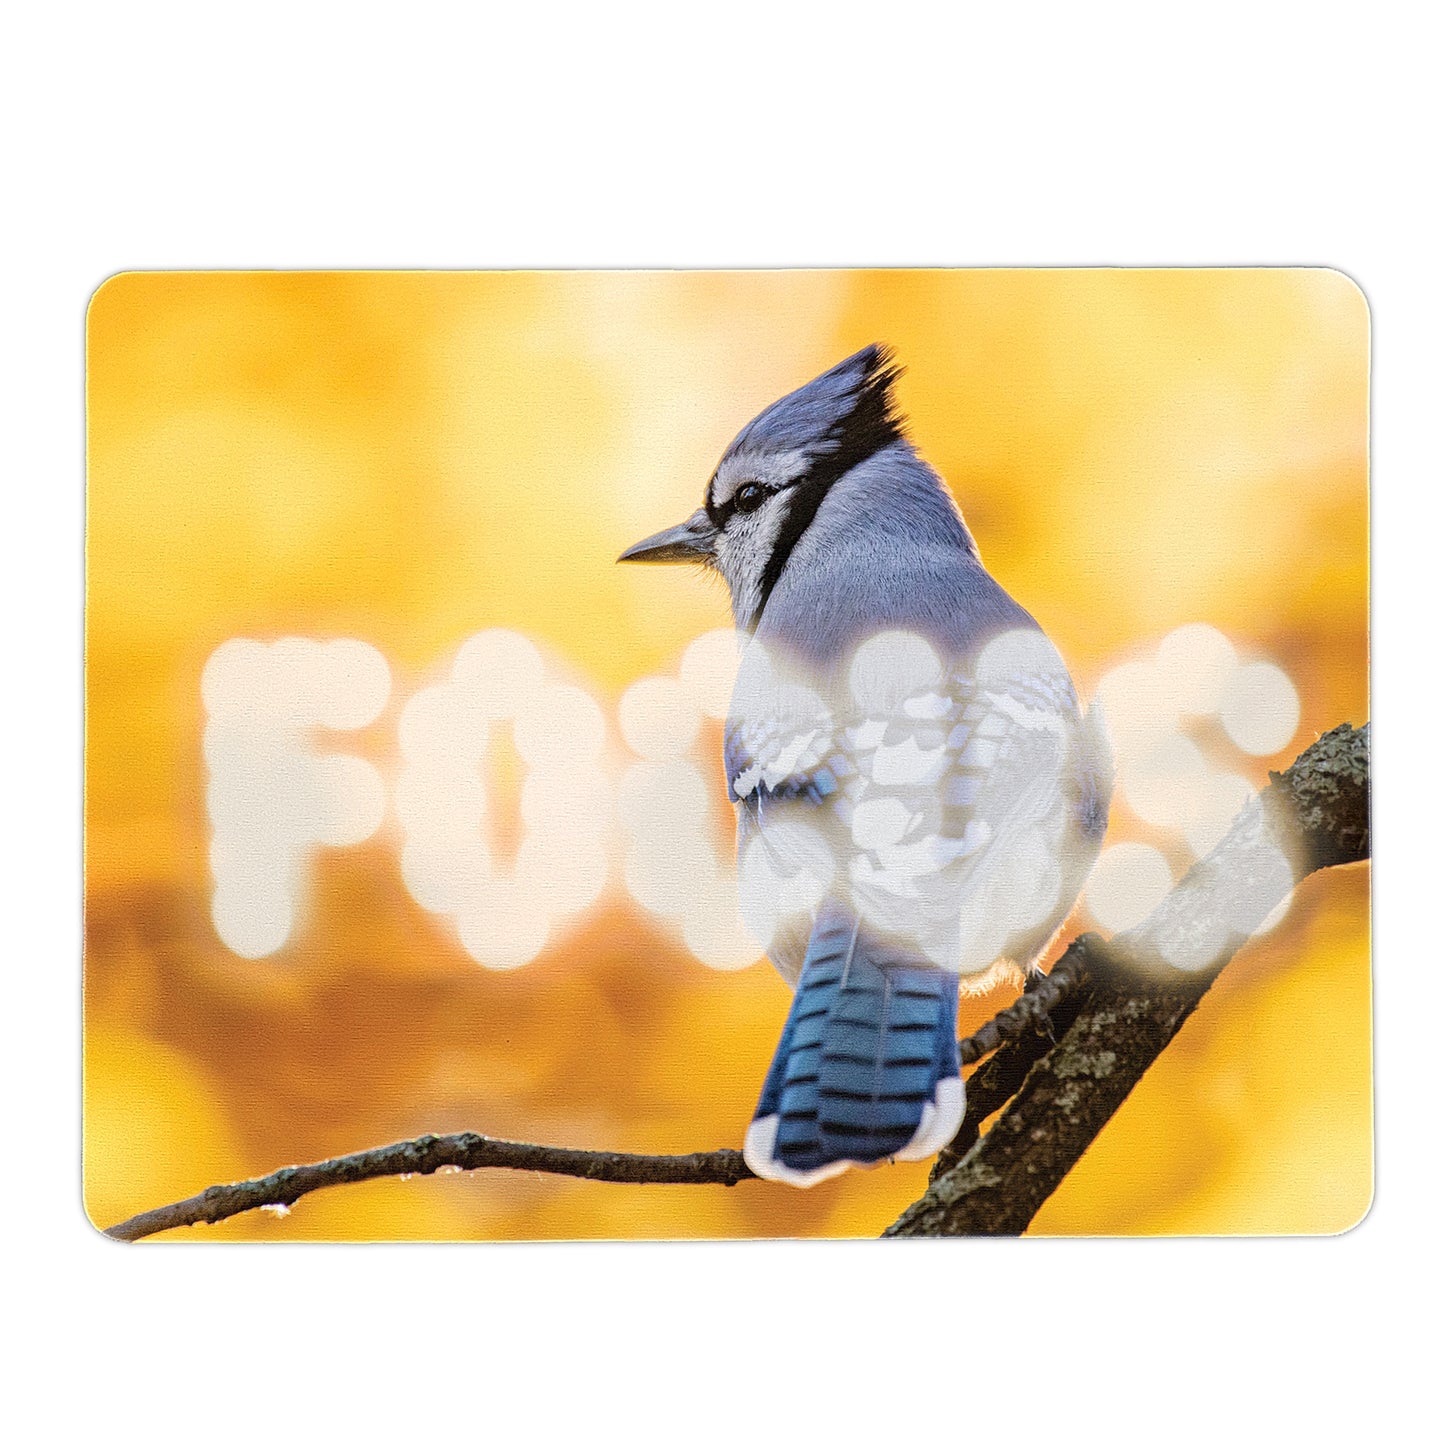 FOCUS - Blue Jay Mouse Pad